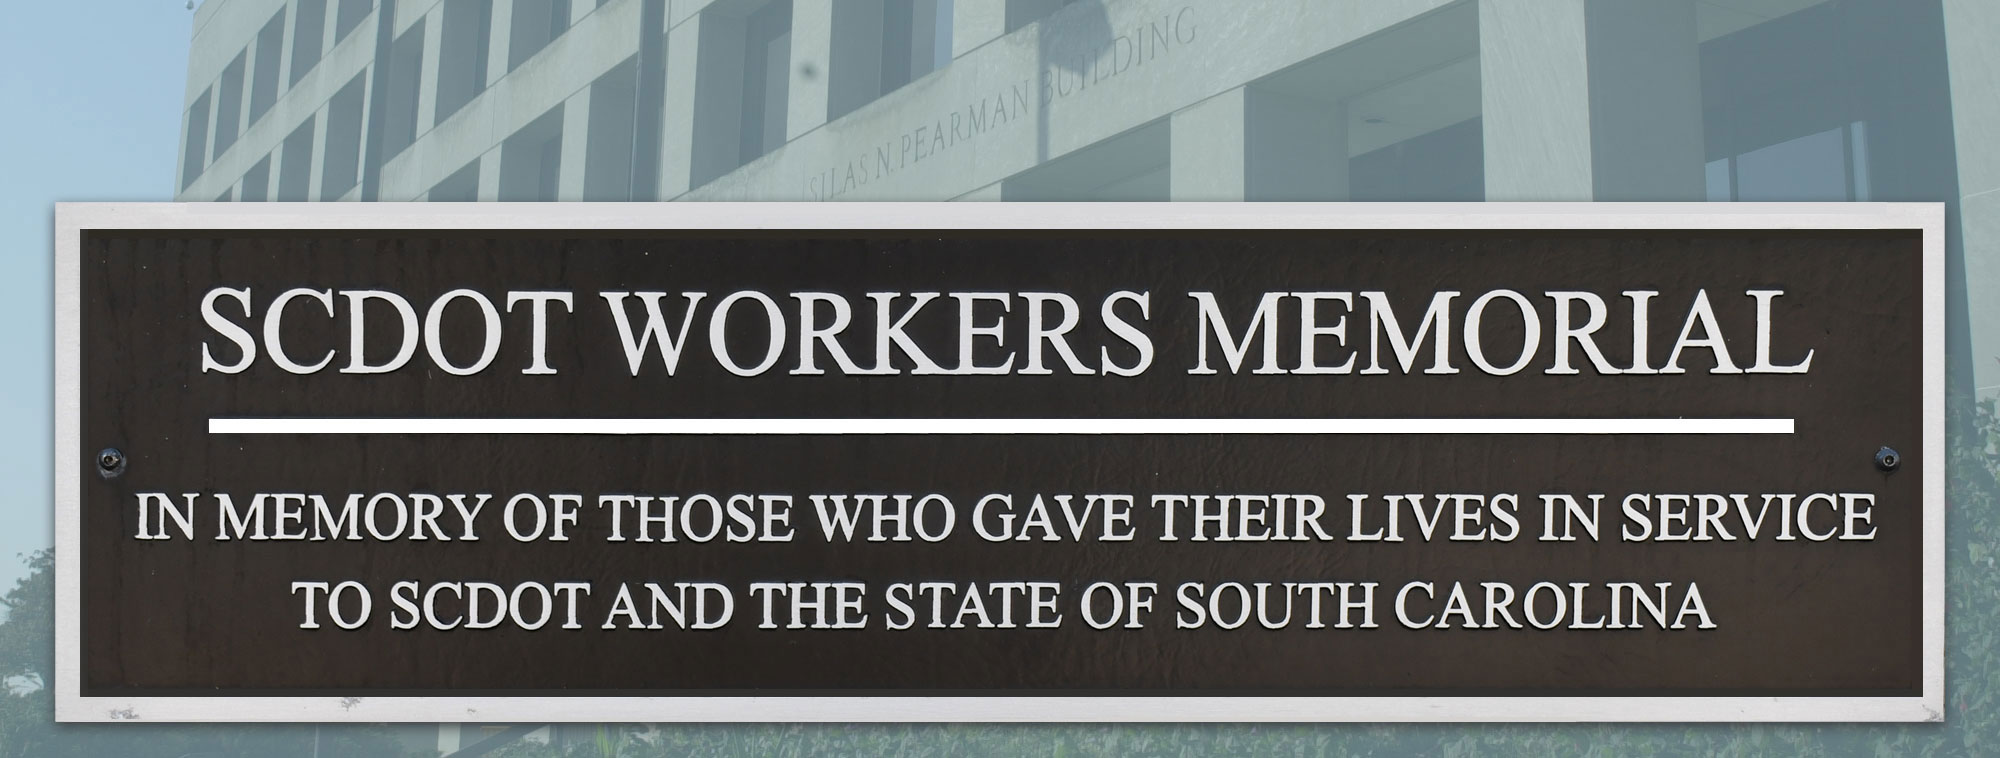 SCDOT Workers Memorial plaque - In memory of those who gave their lives in service to SCDOT and the state of South Carolina.